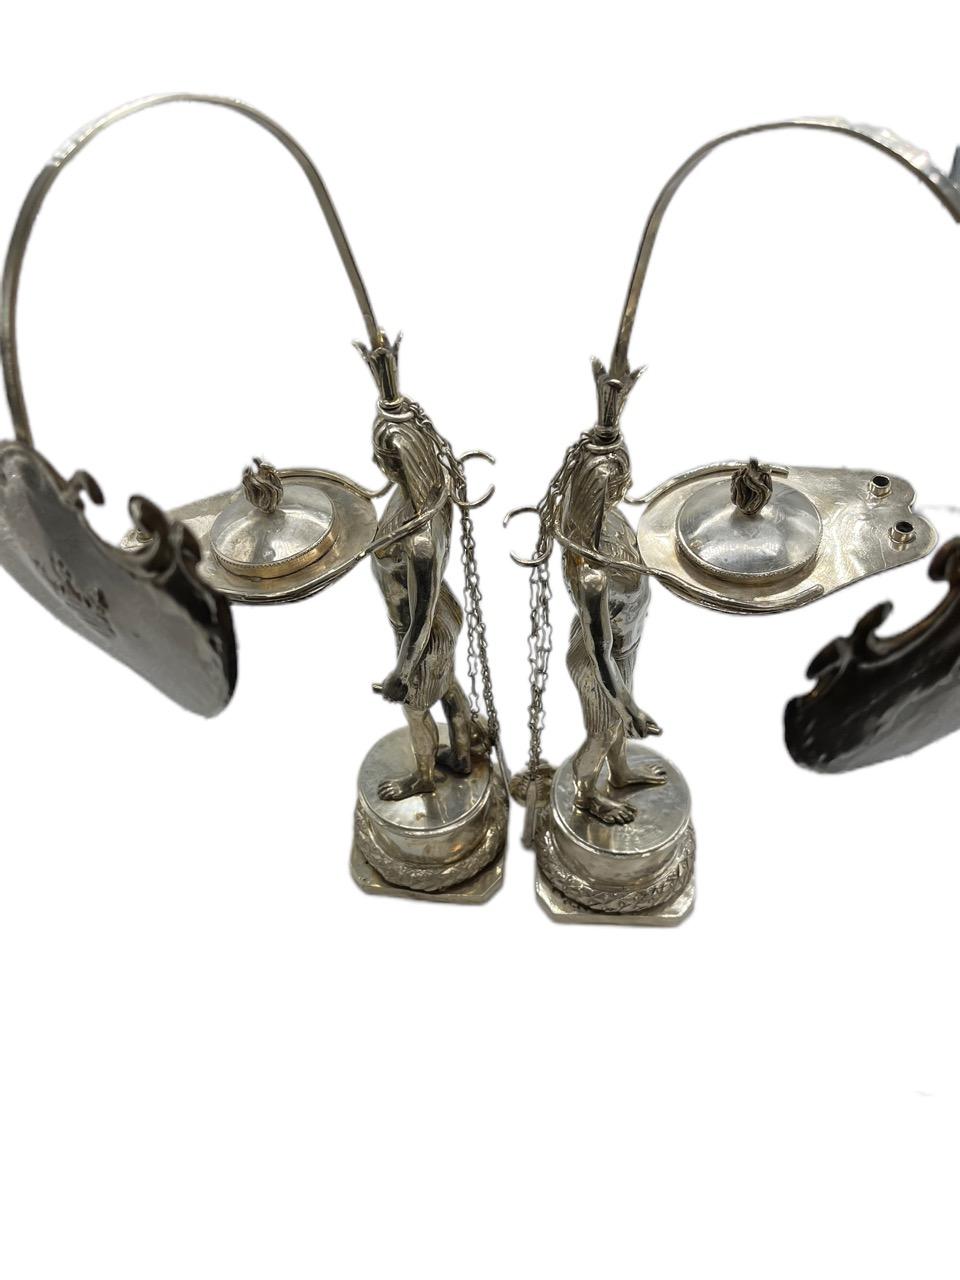 Neoclassical Pair of Early 19th Century Italian Antique Silver Oil Lamps by Vincenzo Belli II For Sale